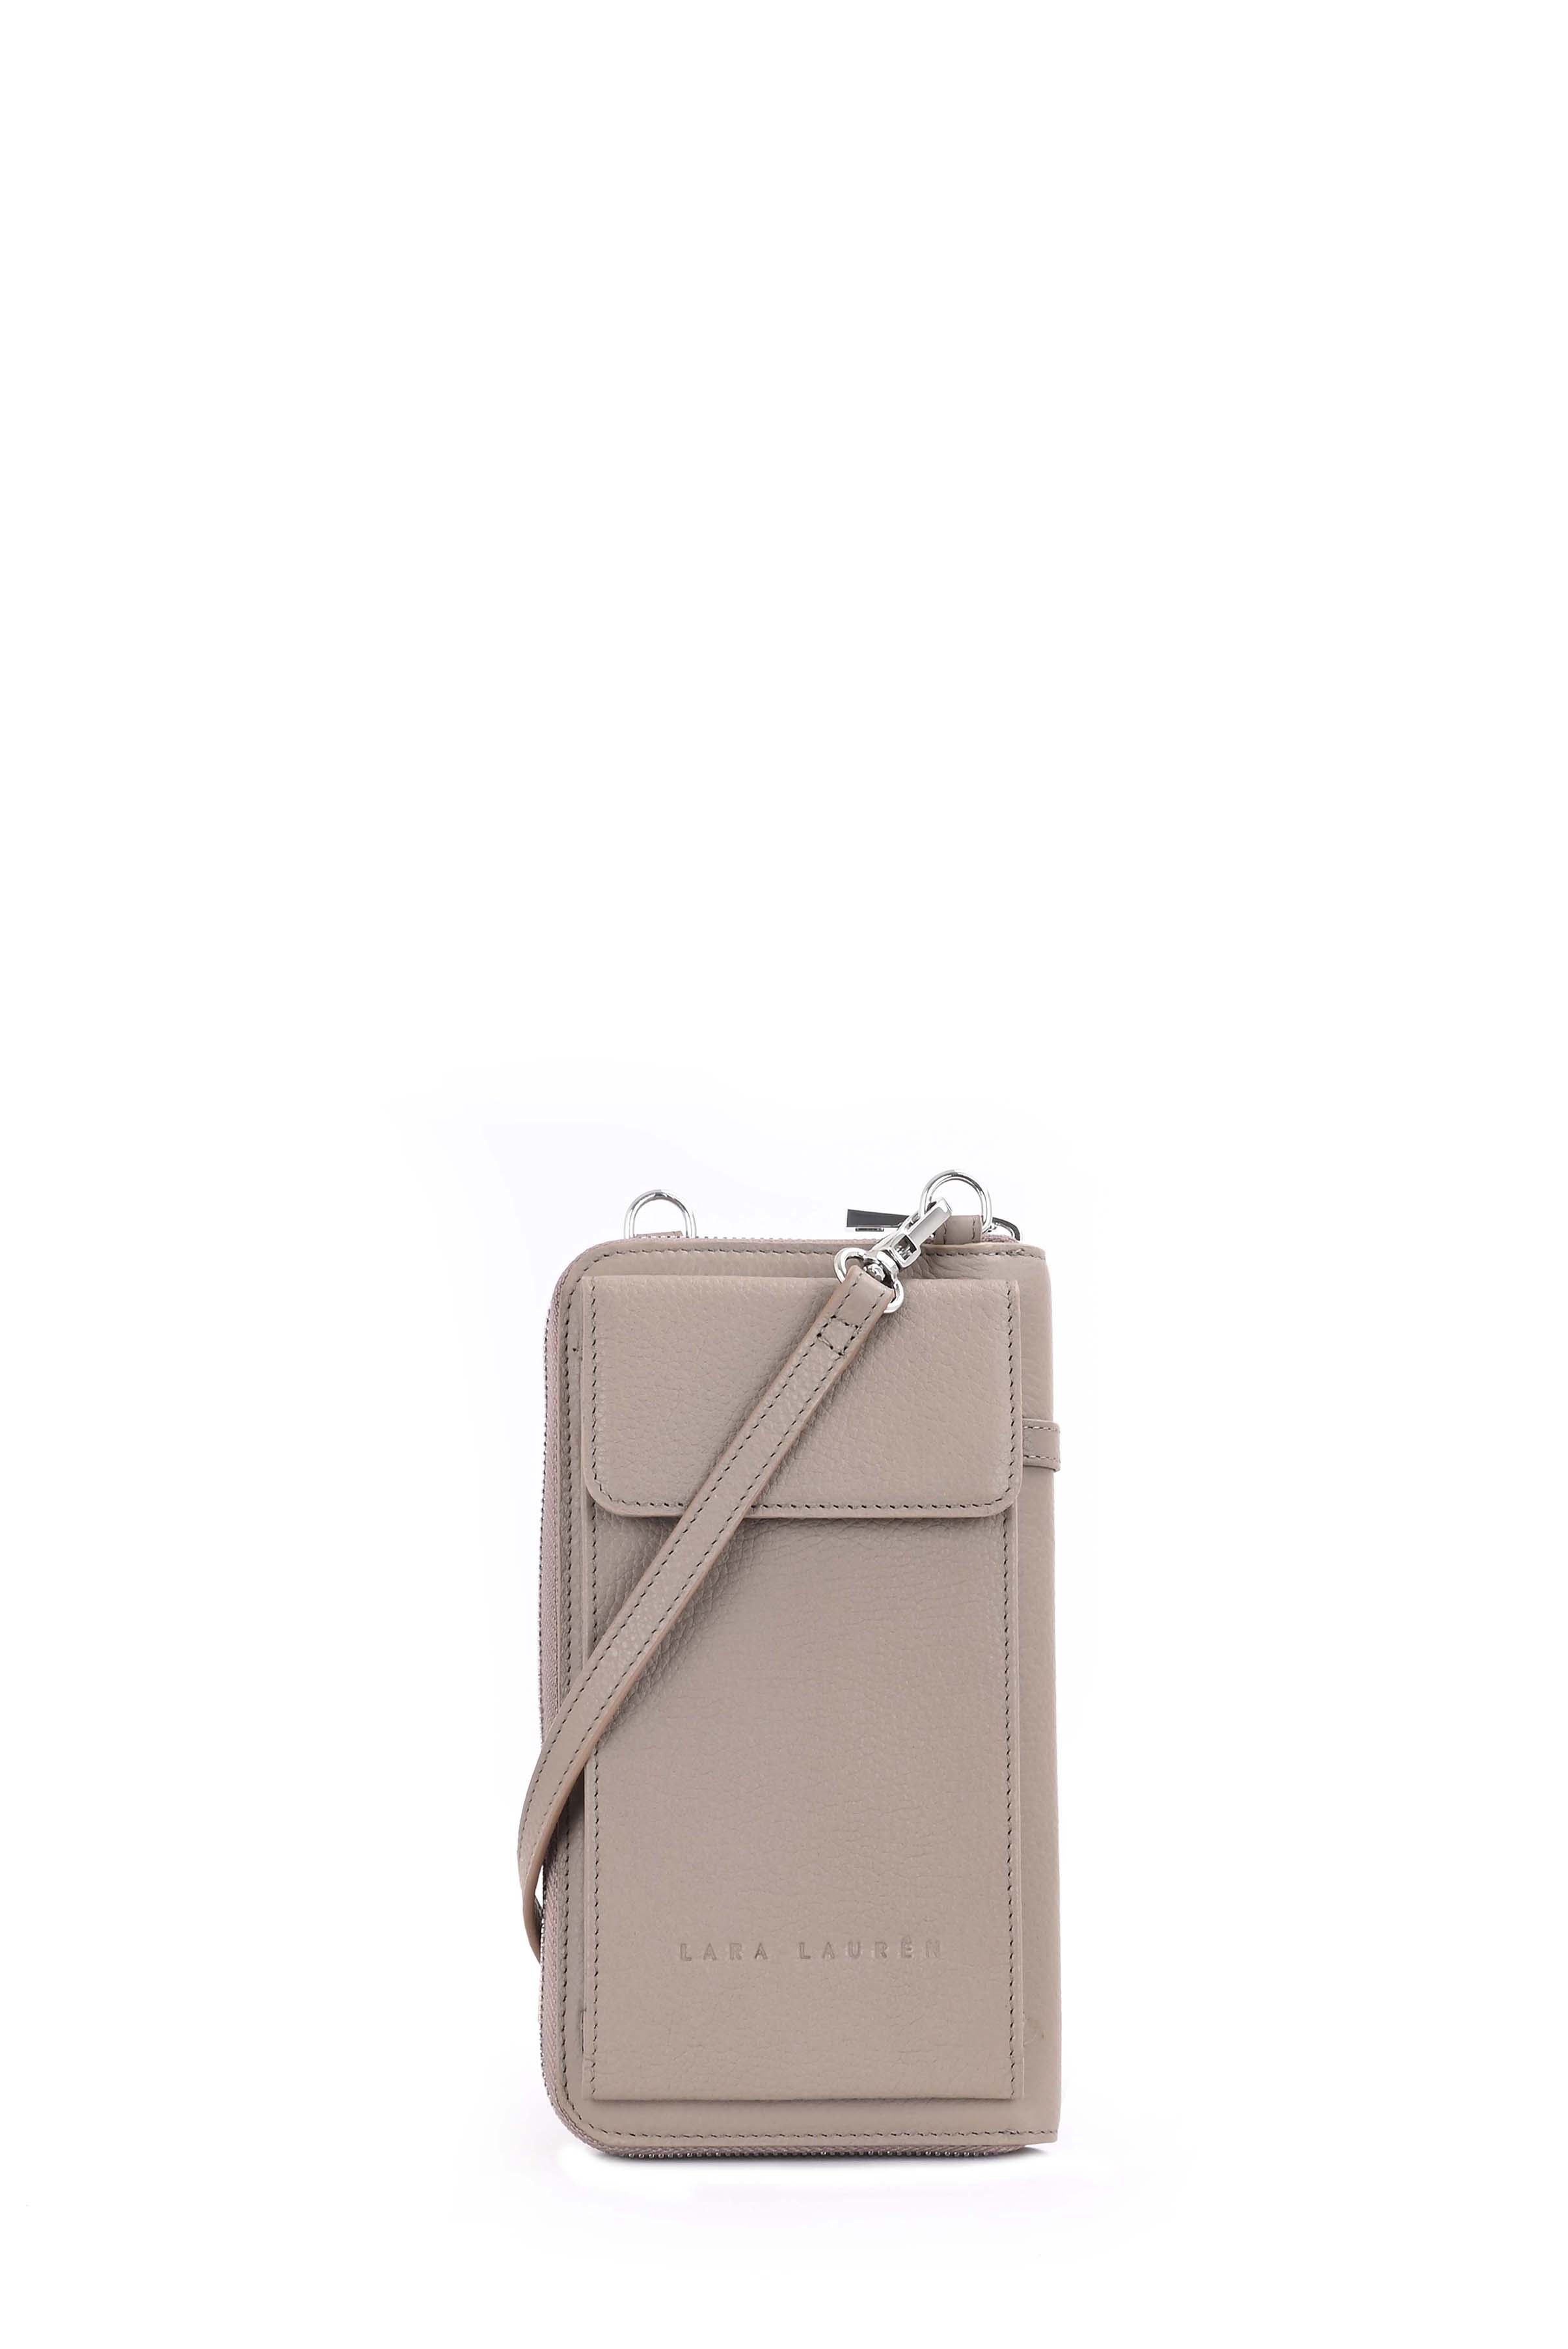 CITY Wallet A Handytasche, leafless tree/ taupe